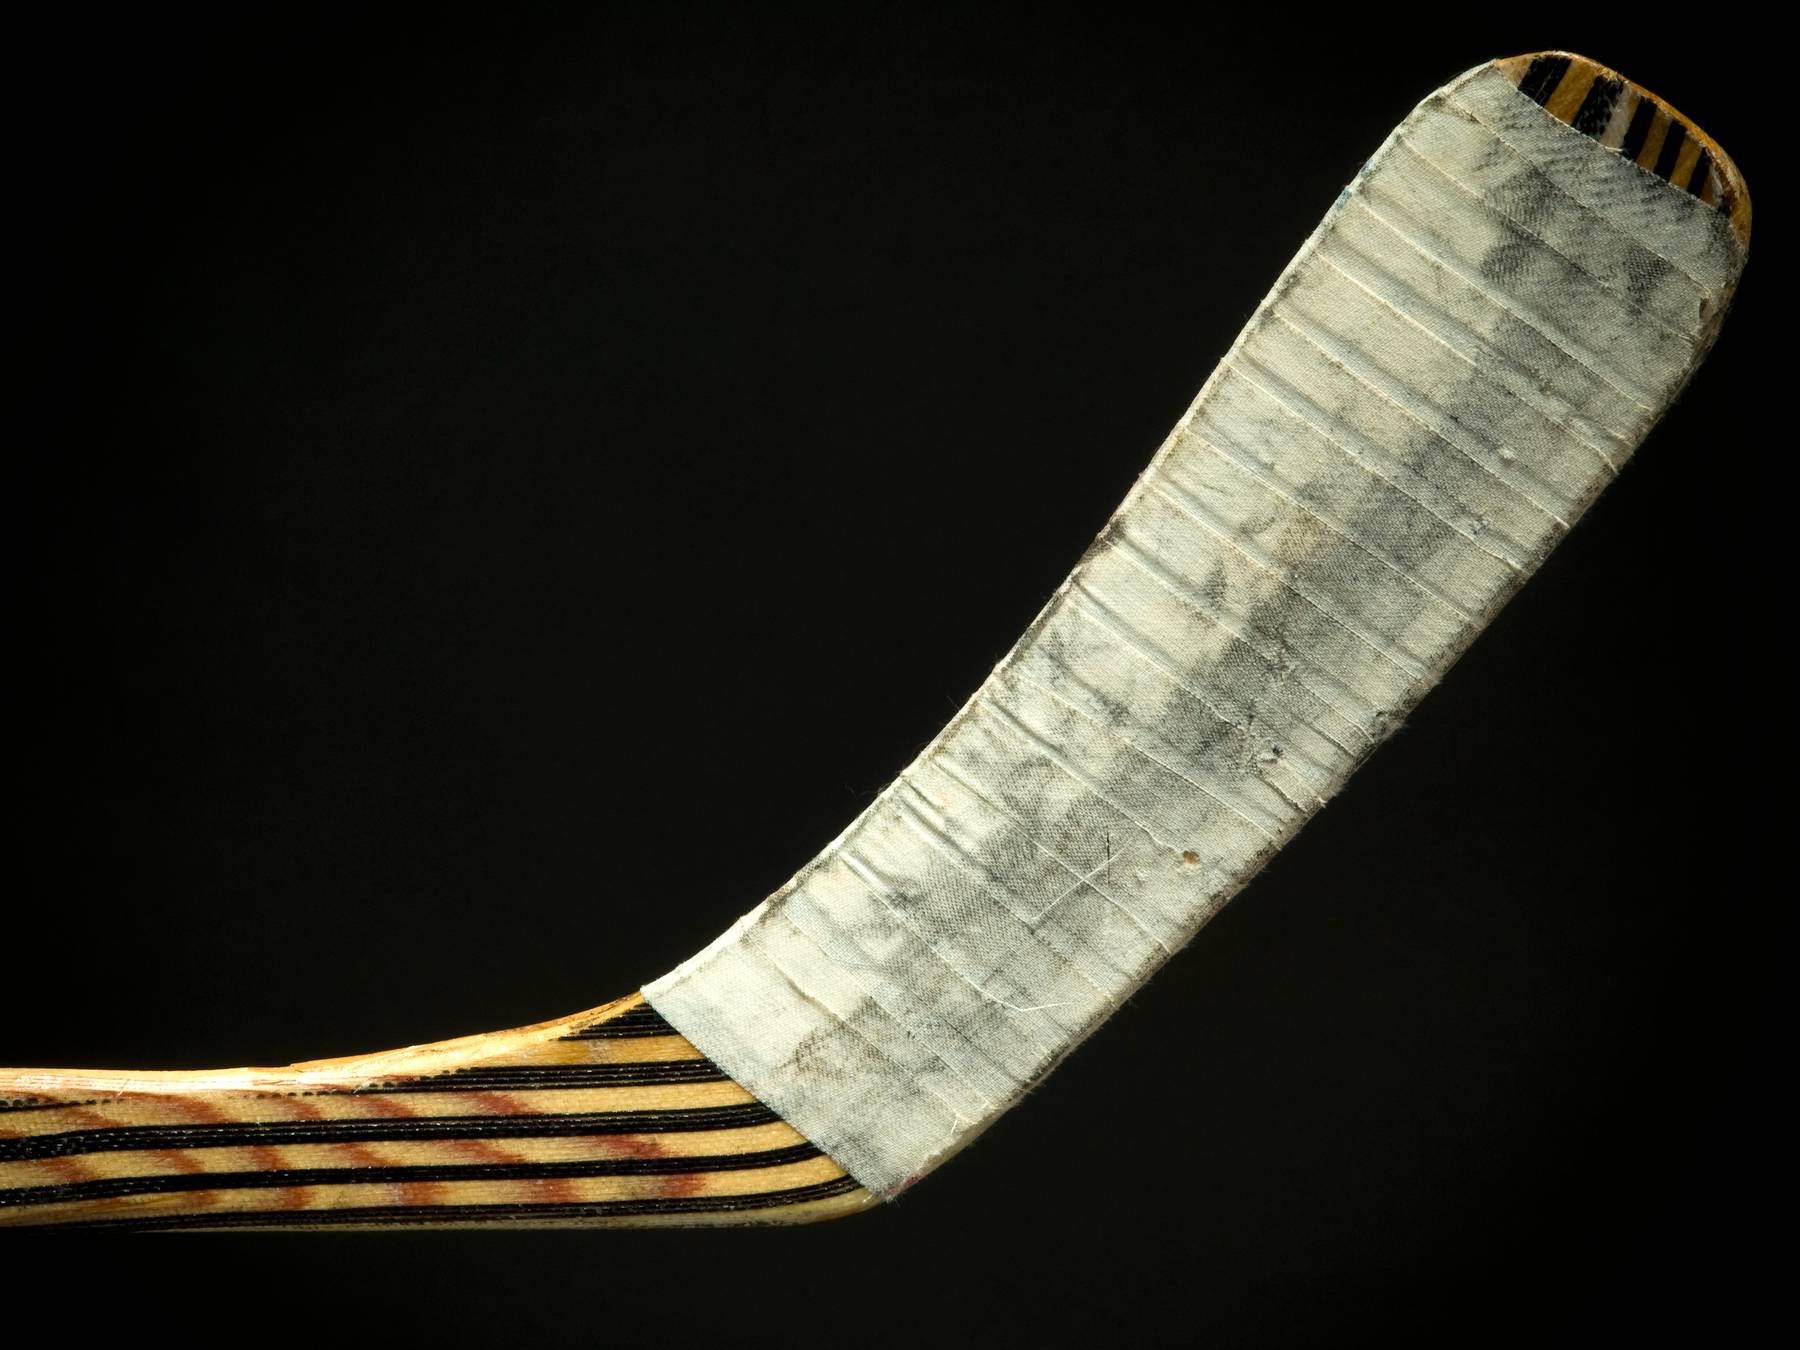 A parasite almost derailed a hockey player's career.